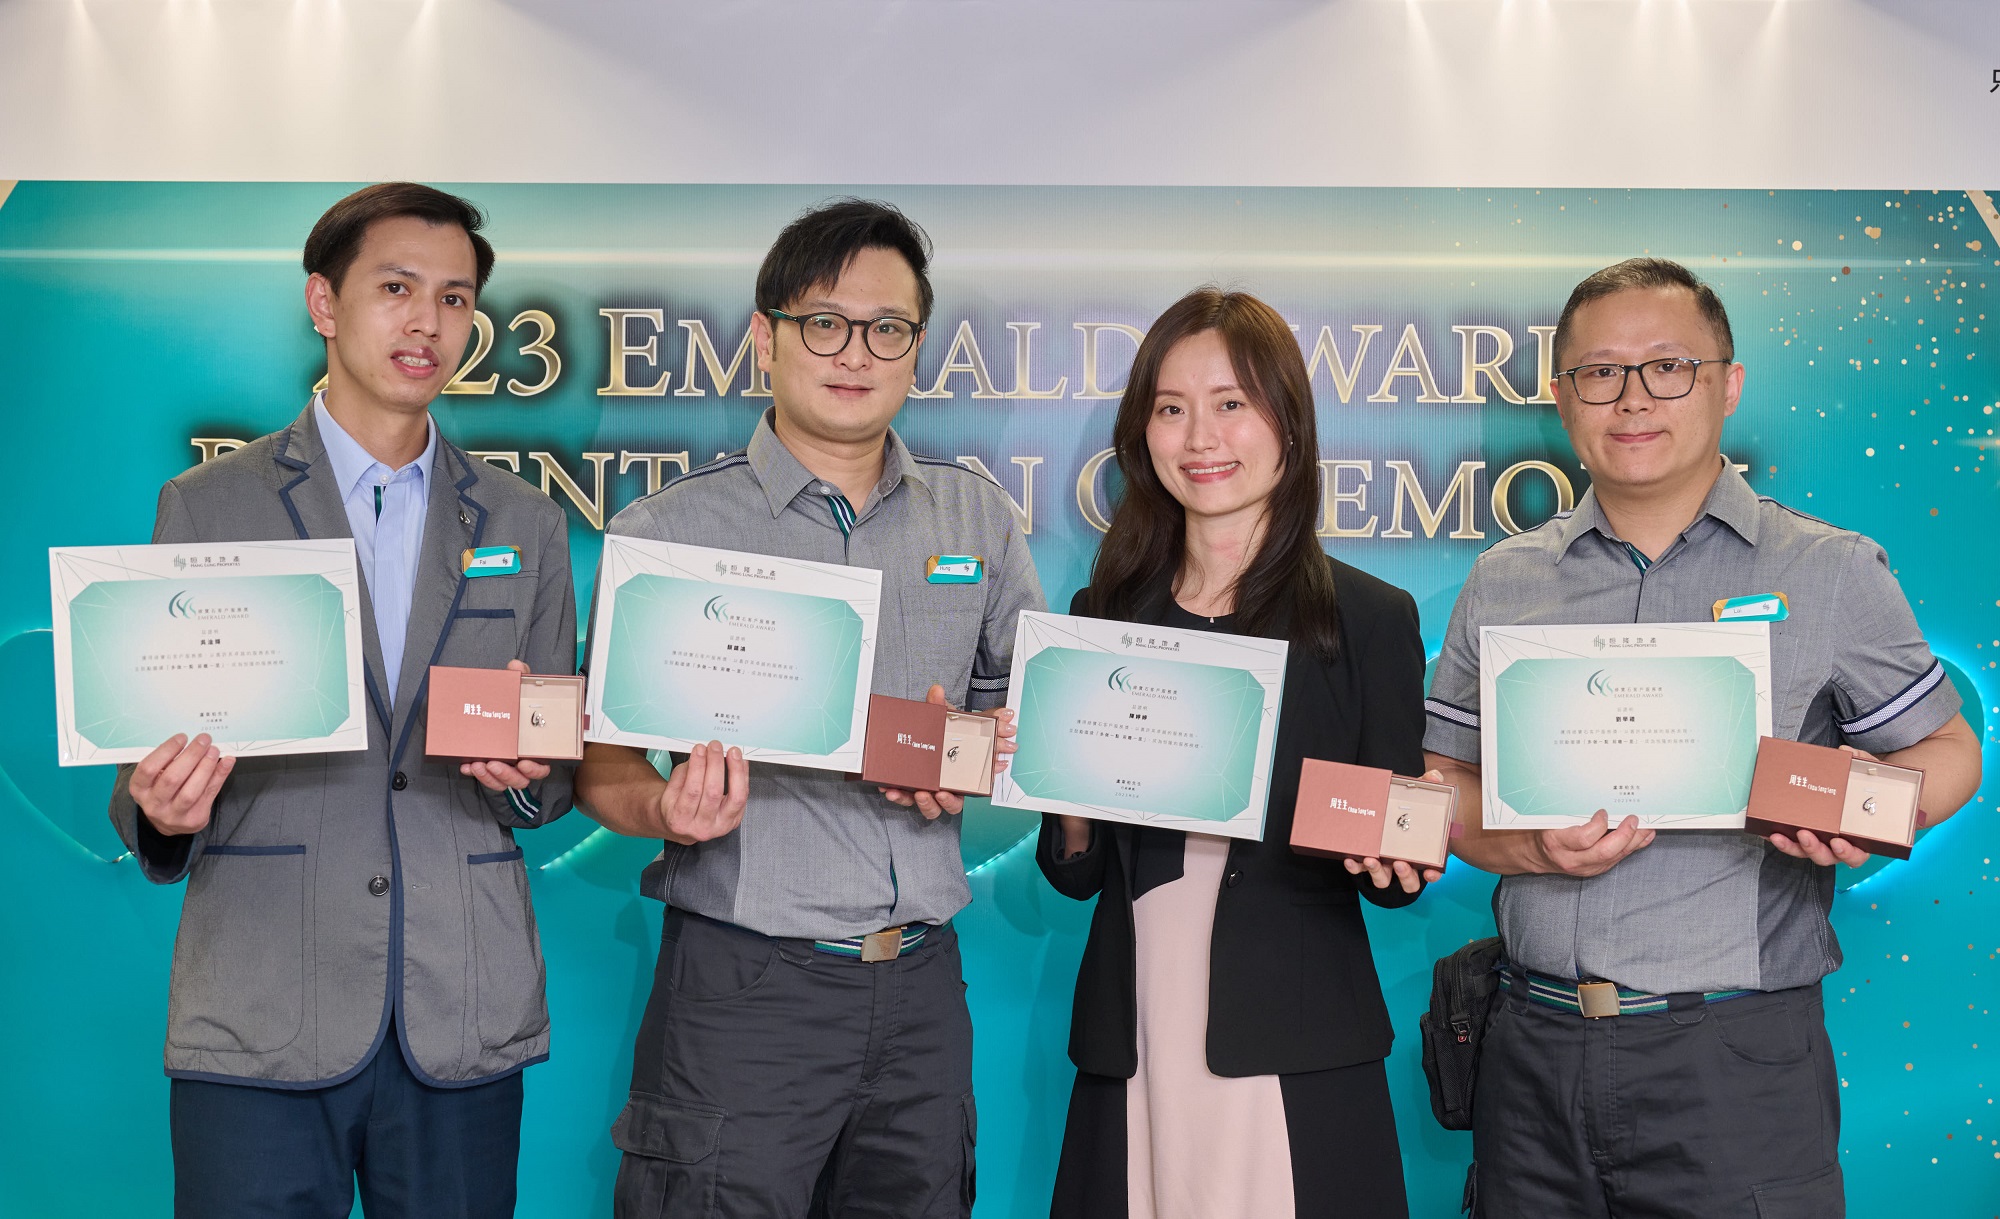 (From left) Ng Kam Fai, Ngan Chun Hung, Joey Chan and Lau Hok Lai from Amoy Gardens, Hong Kong, receive the Hang Lung Emerald Award for demonstrating their sense of mission to protect residents' health and safety. Their proactive follow-up successfully averted the potential danger of concrete falling on an elderly resident in her unit, despite the resident rejecting earlier offers of assistance